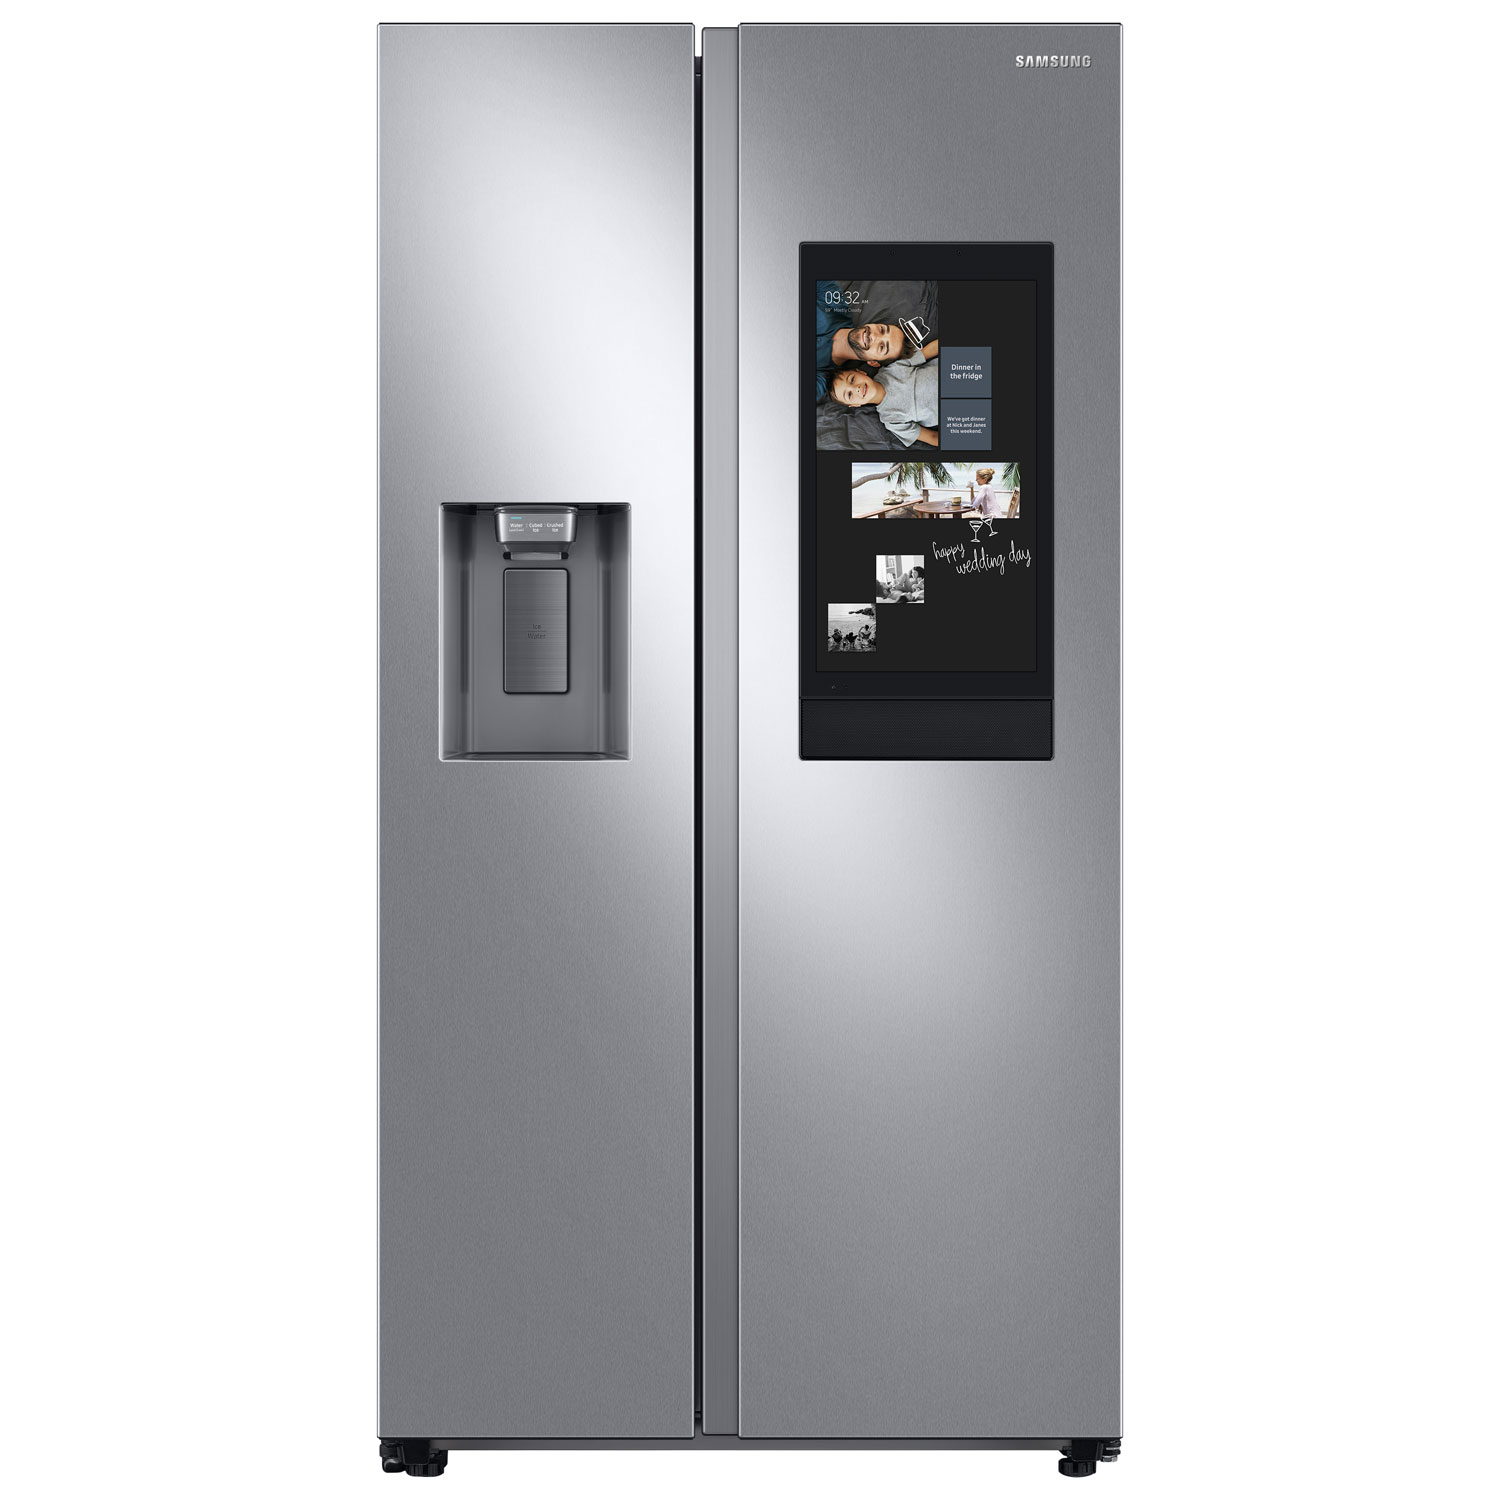 Samsung Family Hub 36" 21.5 Cu. Ft. Side-By-Side Refrigerator (RS22T5561SR/AA) - Stainless Steel